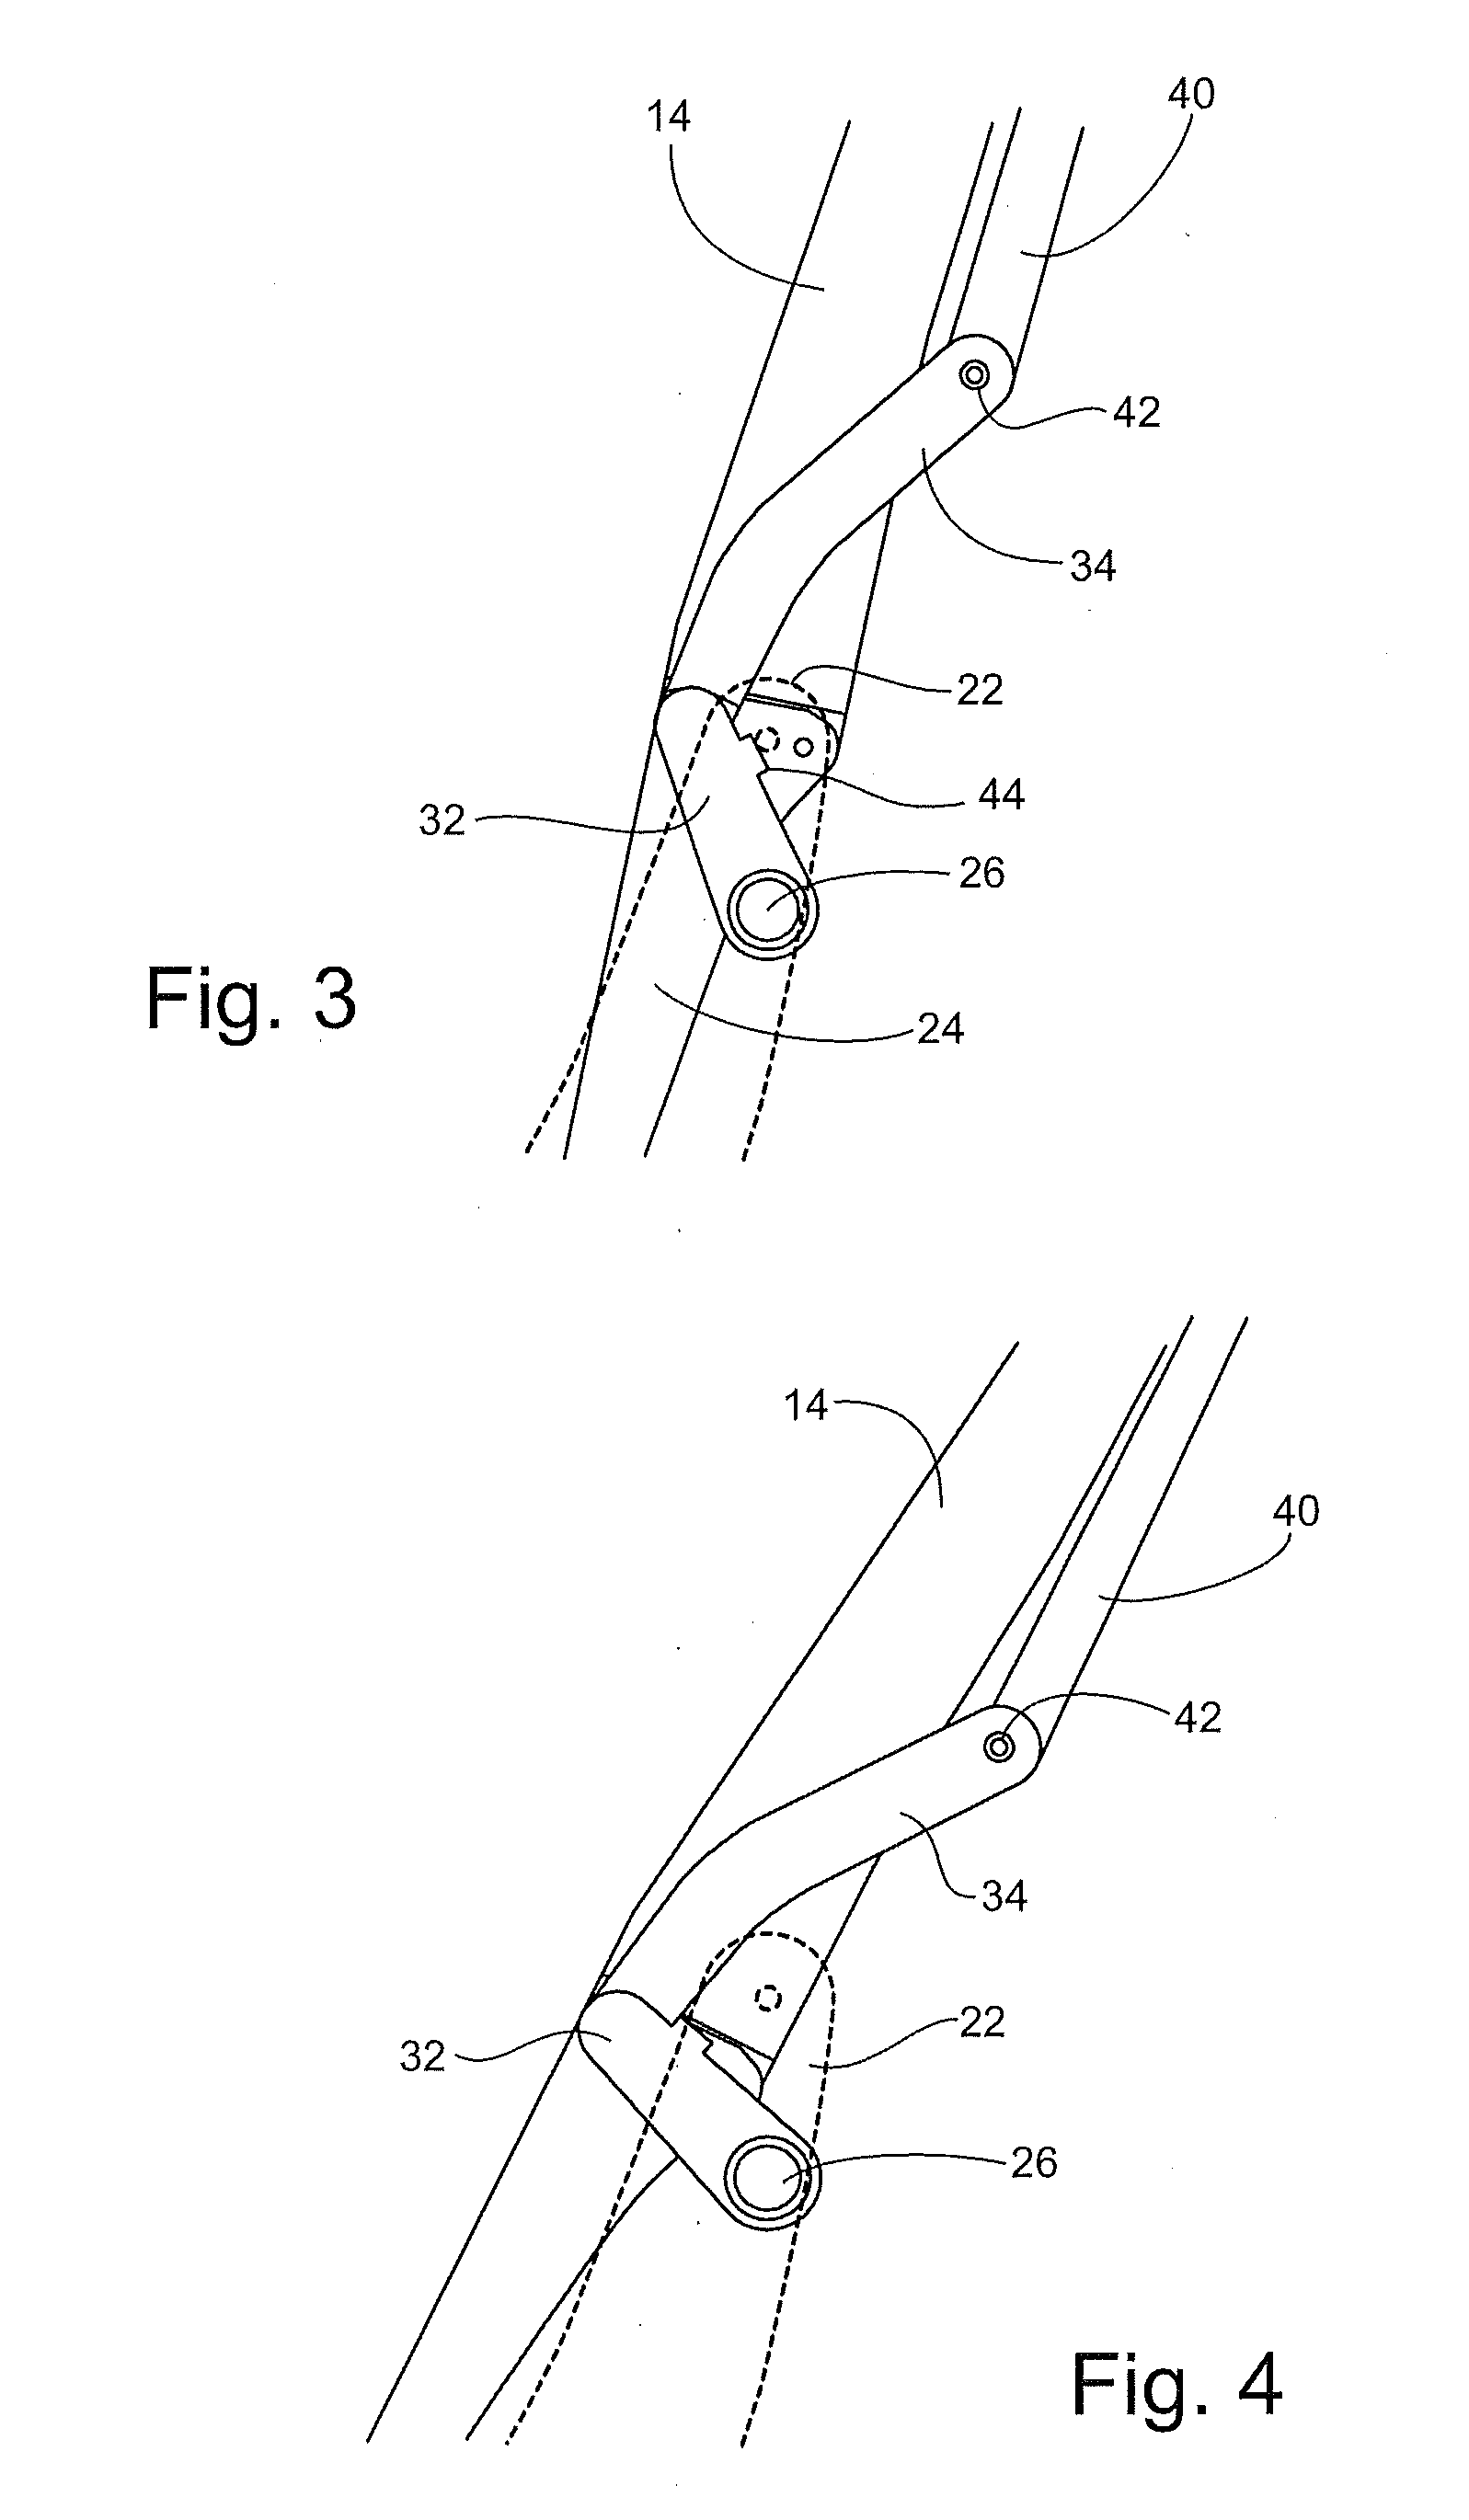 Passenger seat recline and tray table support mechanism